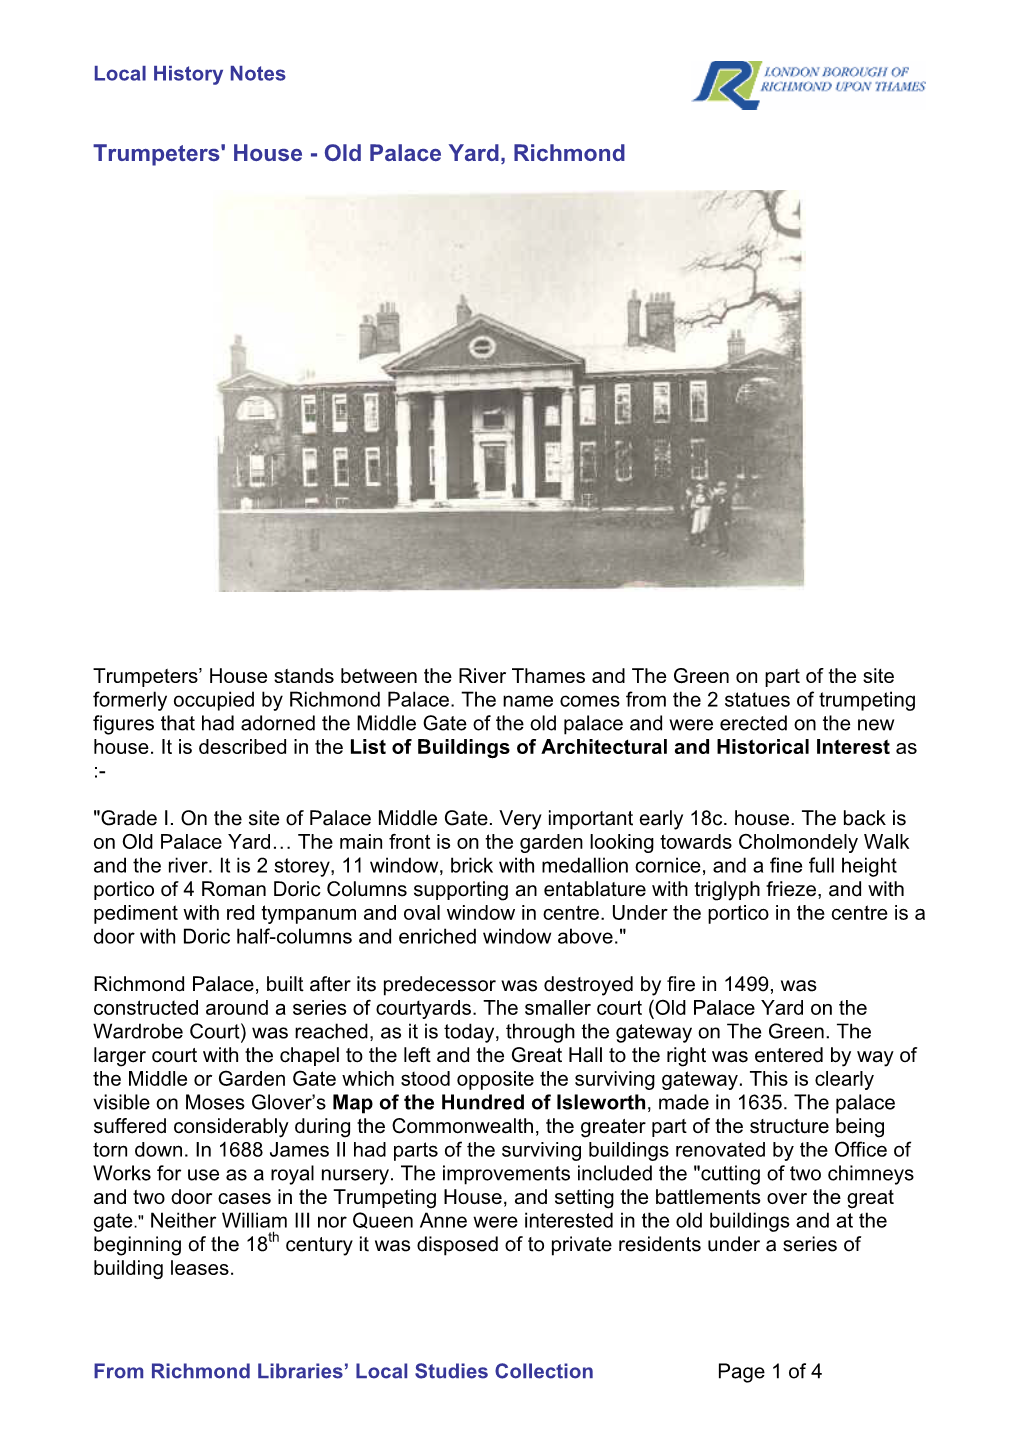 Trumpeters' House, Old Palace Yard, Richmond – [Local History Notes